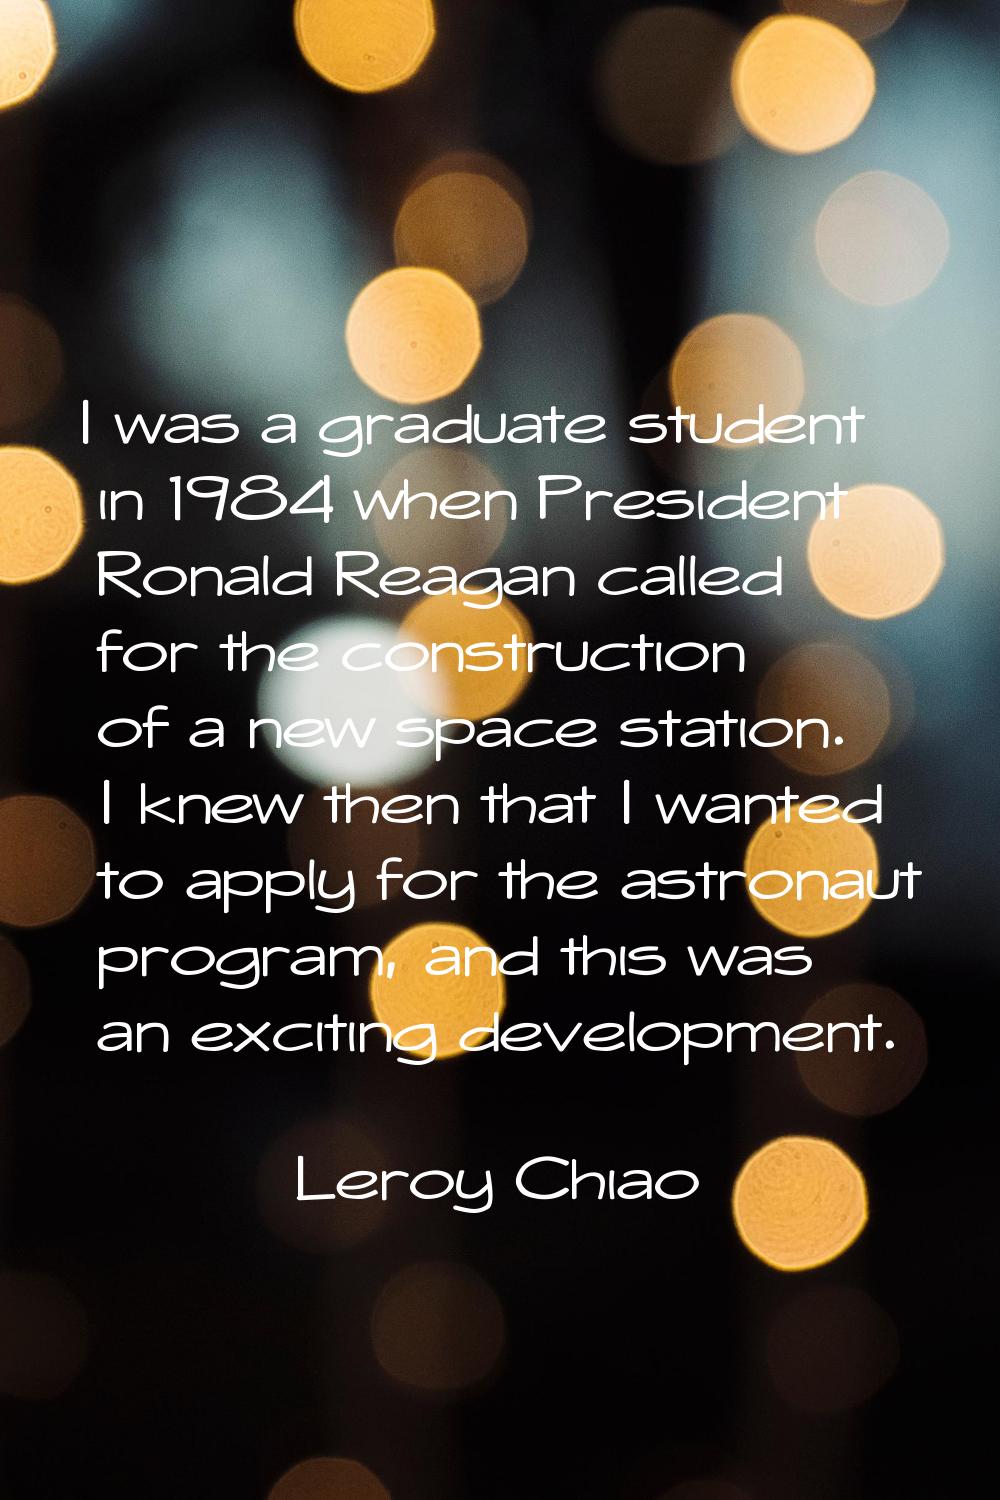 I was a graduate student in 1984 when President Ronald Reagan called for the construction of a new 